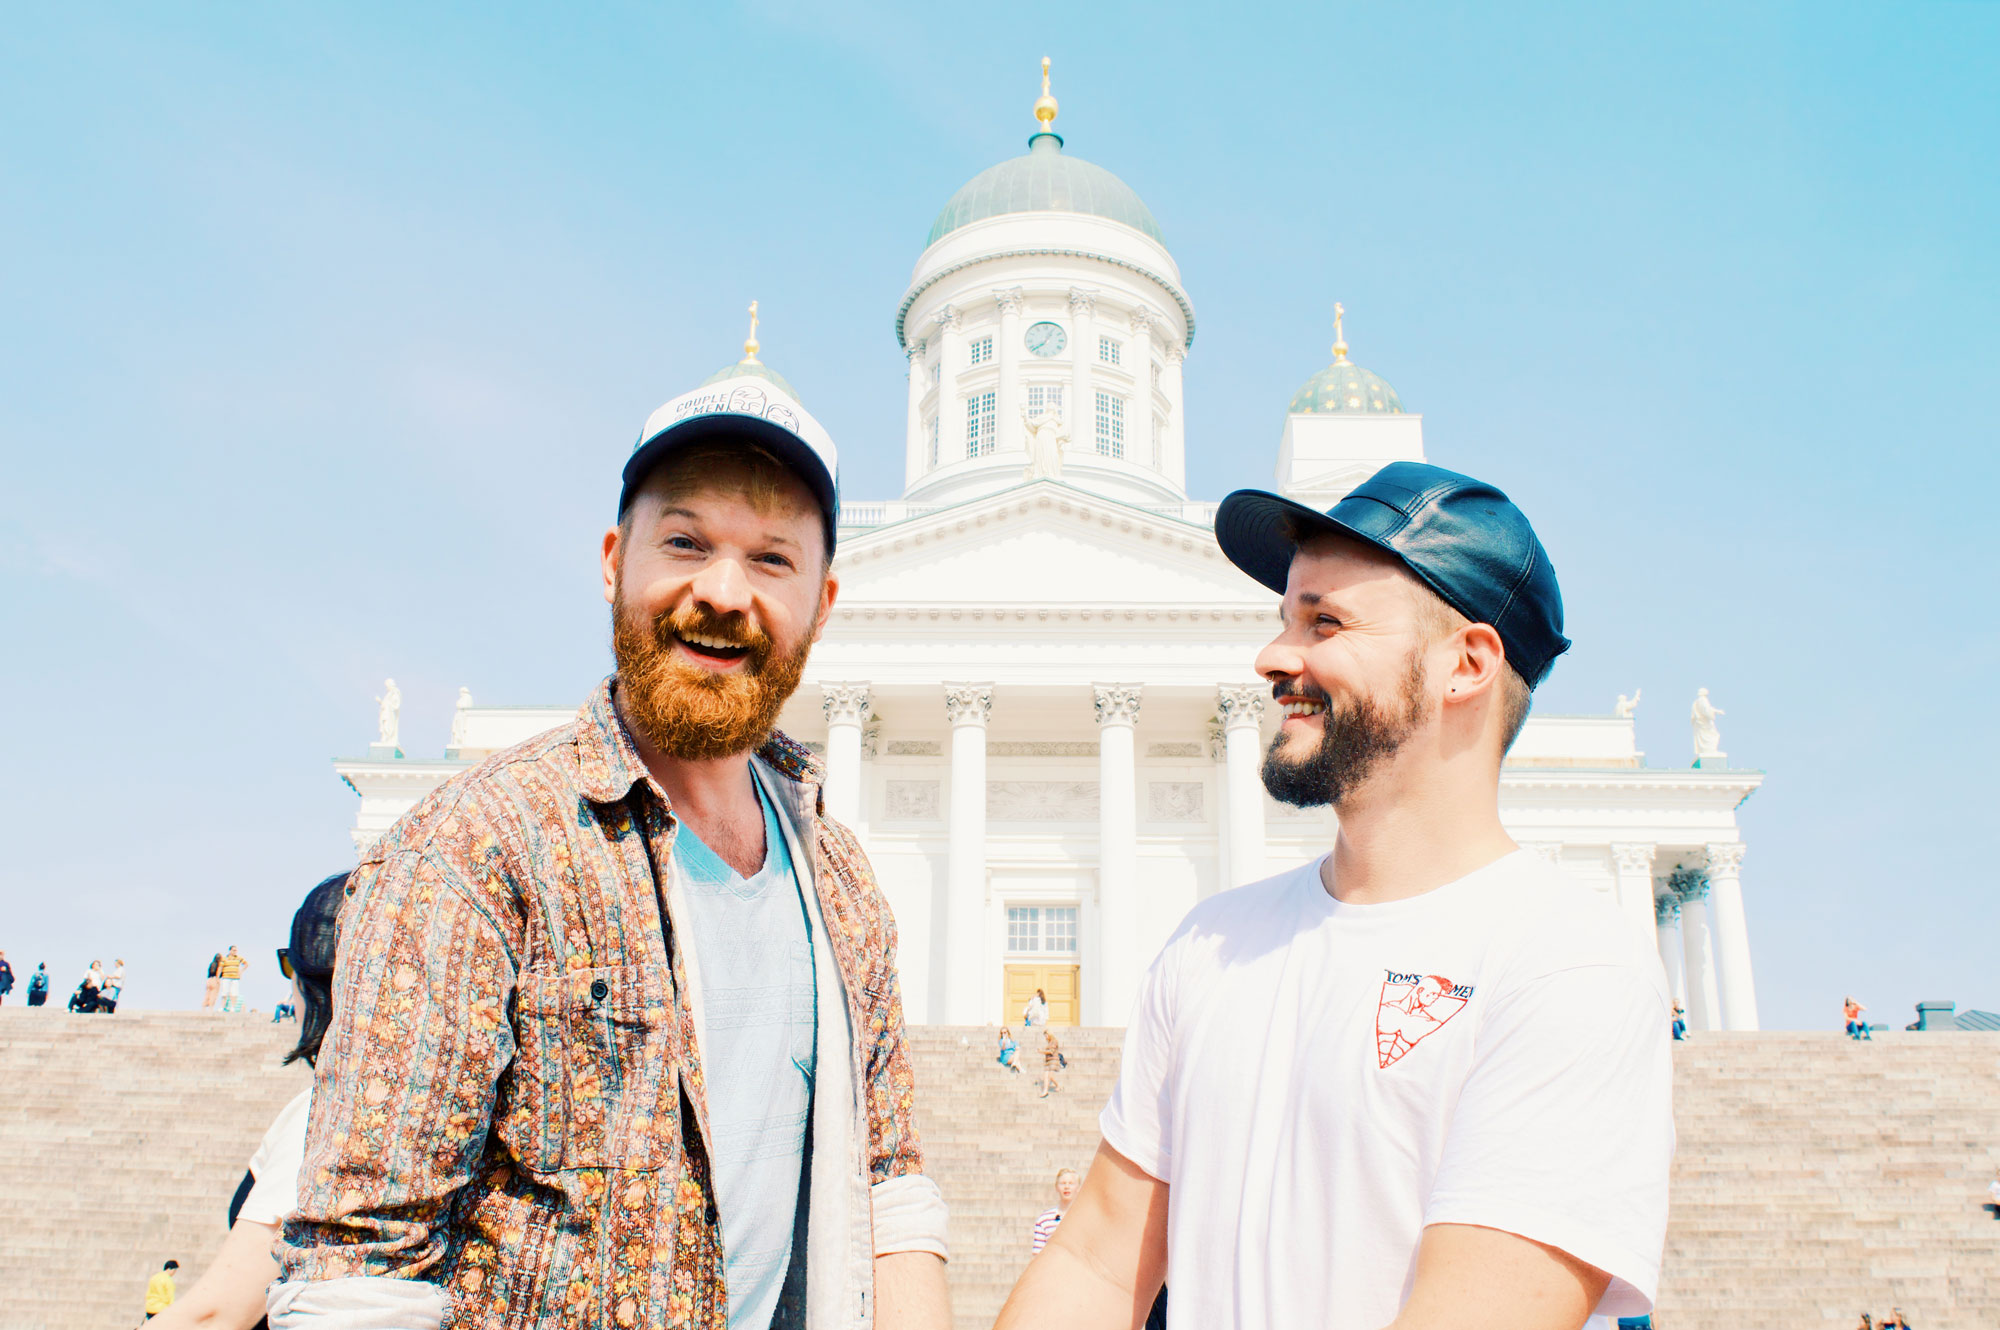 Helsinki in Summer: A Gay Couple’s City Trip to the Capital City of Finland